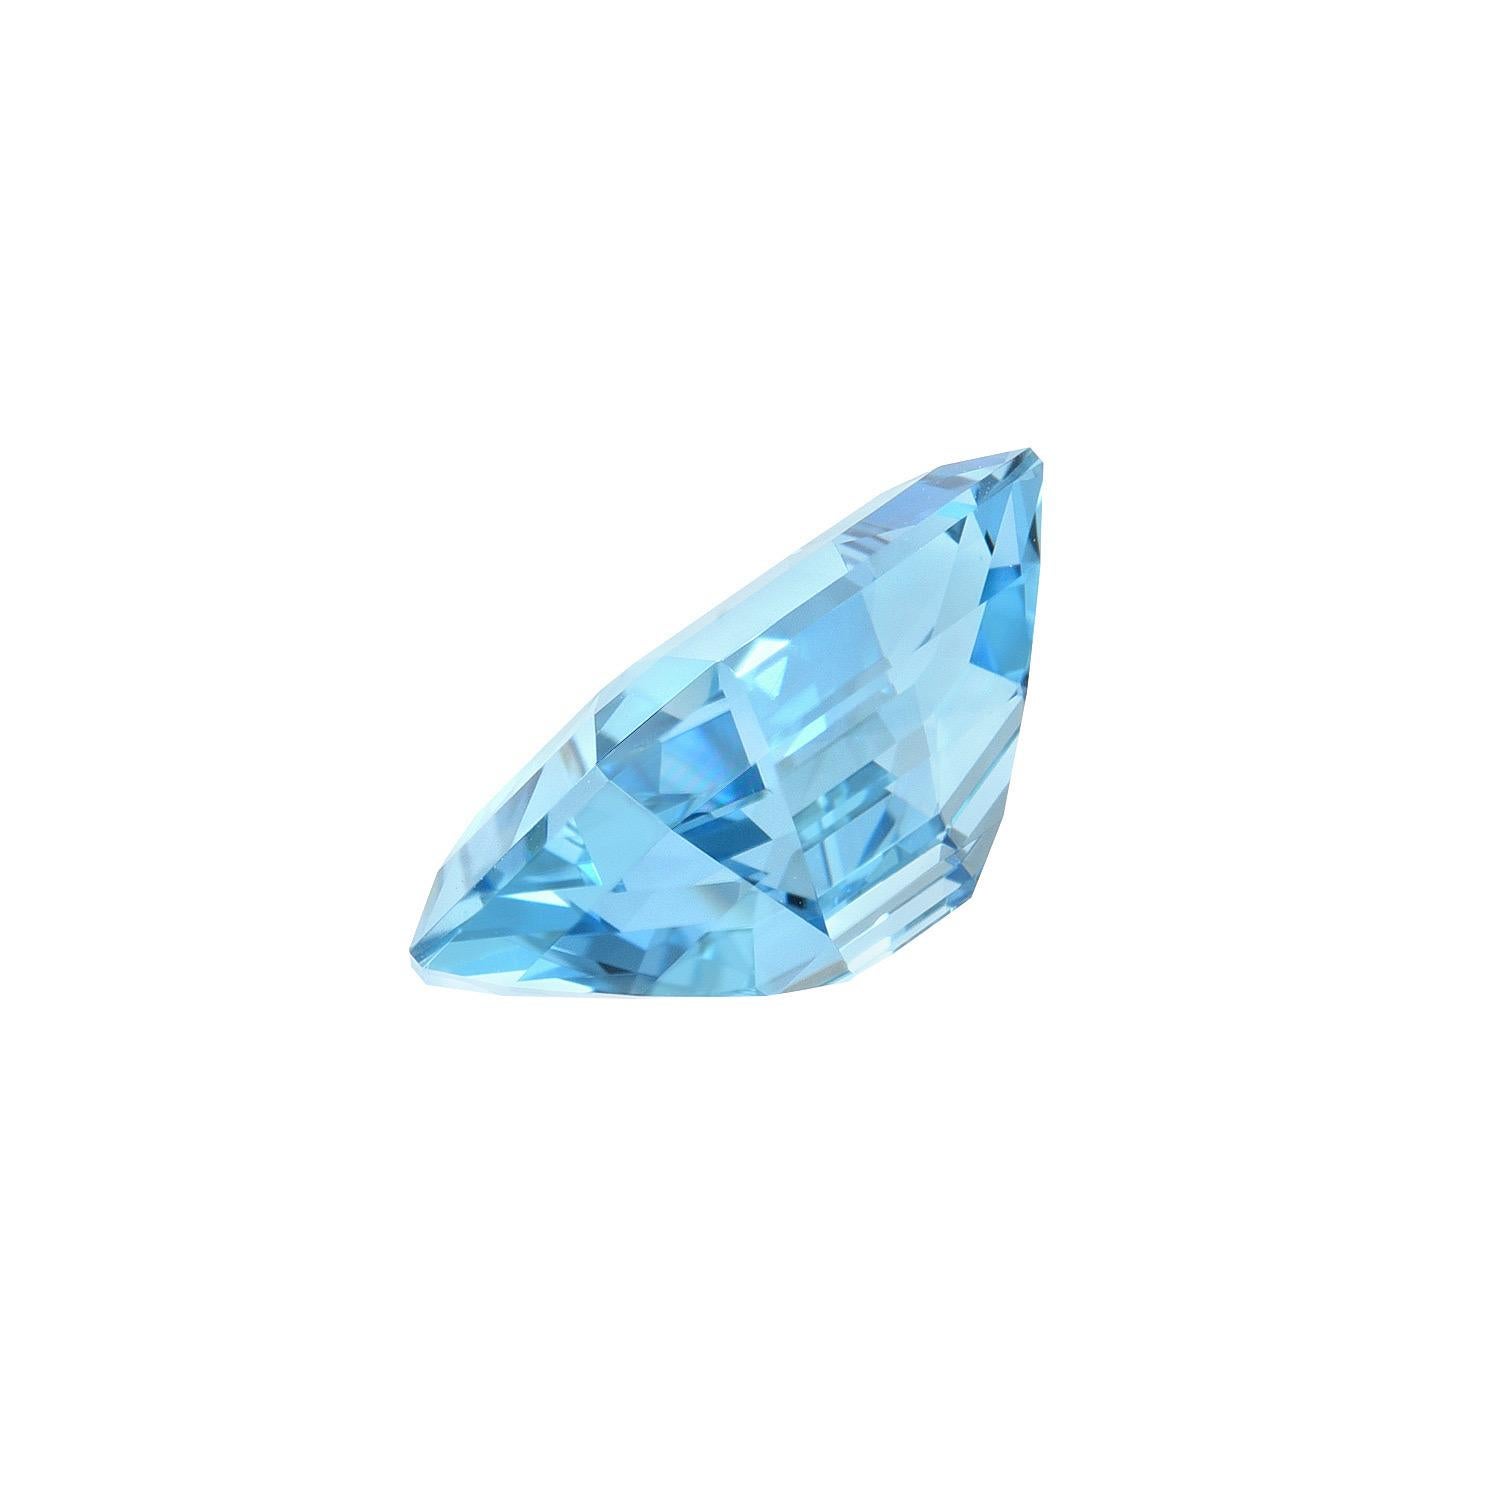 Collection quality, classic 4.08 carat Emerald-Cut Aquamarine unmounted gem, offered loose to a sophisticated gemstone connoisseur.
Dimensions: 12.3 x 9 x 5.70 mm.
Returns are accepted and paid by us within 7 days of delivery.
We offer supreme